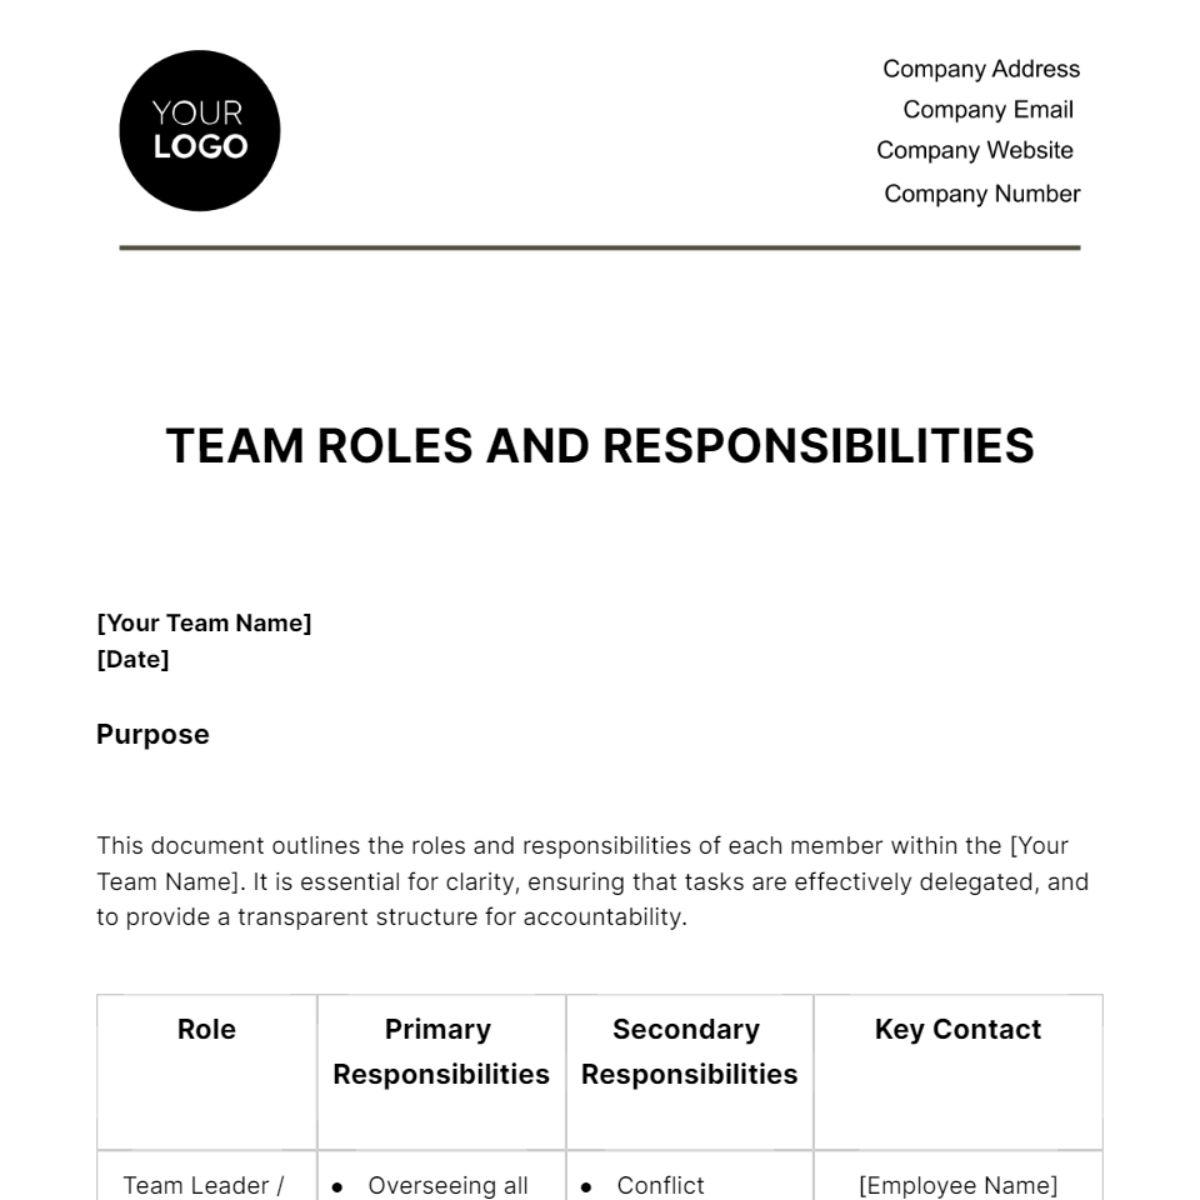 Team Roles and Responsibilities Overview HR Template